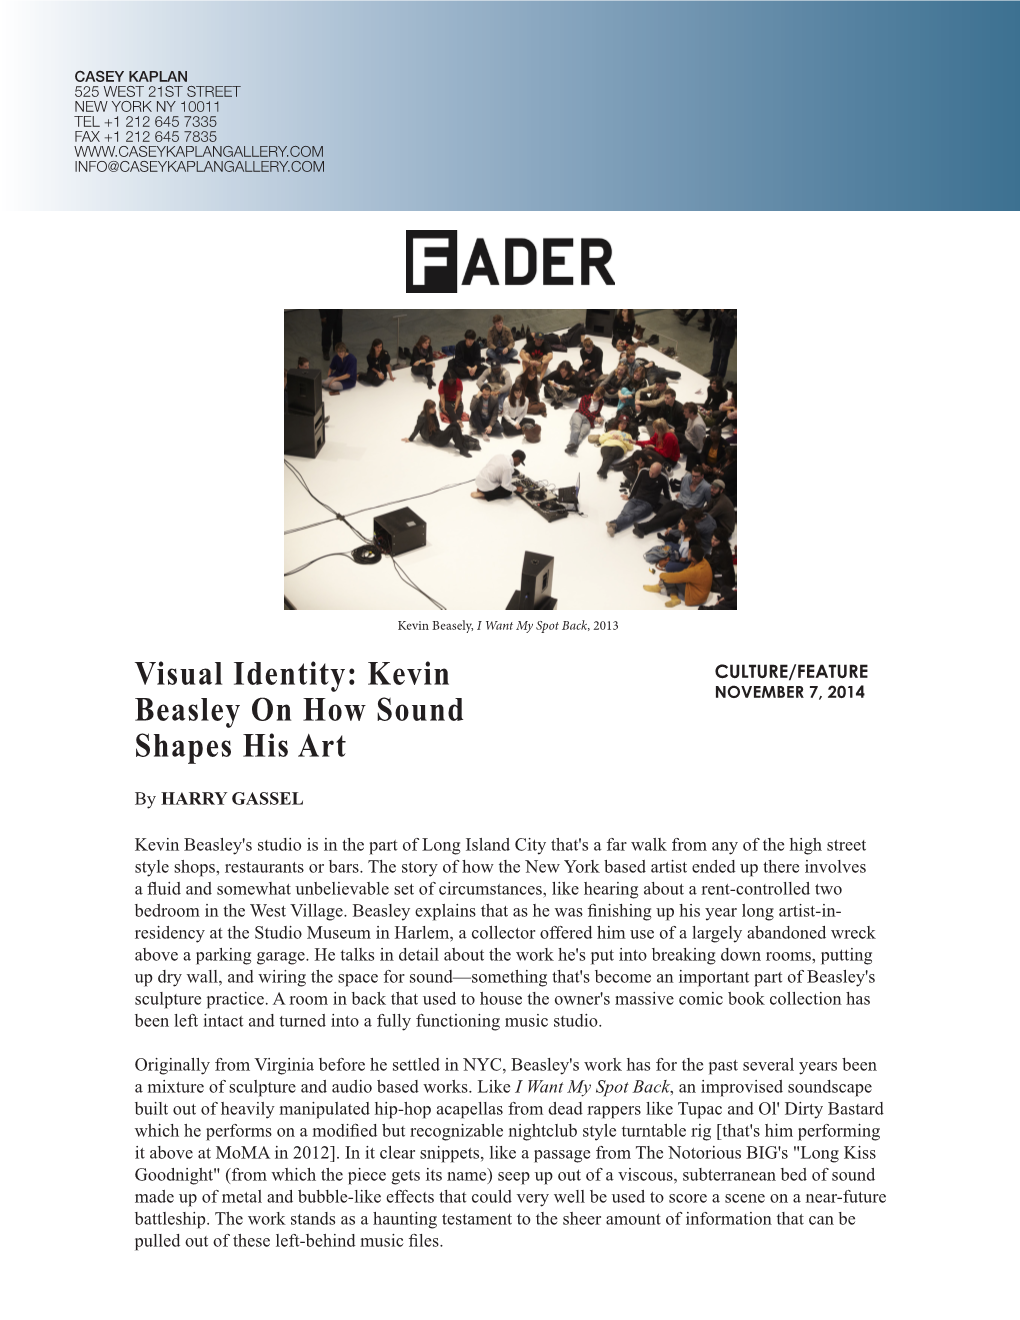 Kevin Beasley on How Sound Shapes His Art,” Fader, November 2014, Online